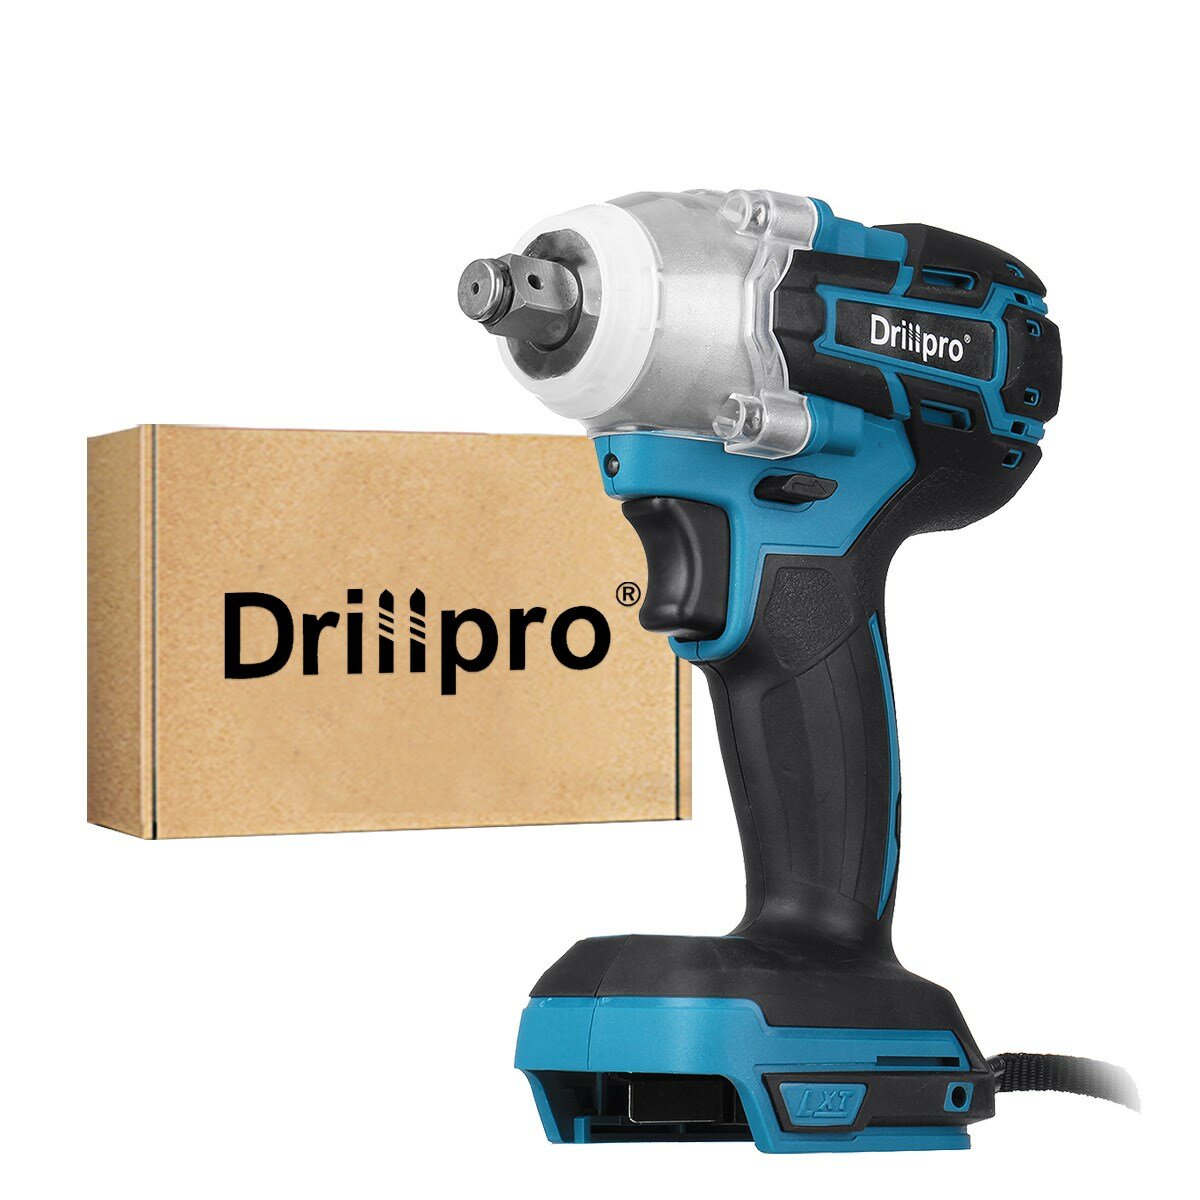 best price,drillpro,18v,3200rpm,impact,wrench,brushless,discount